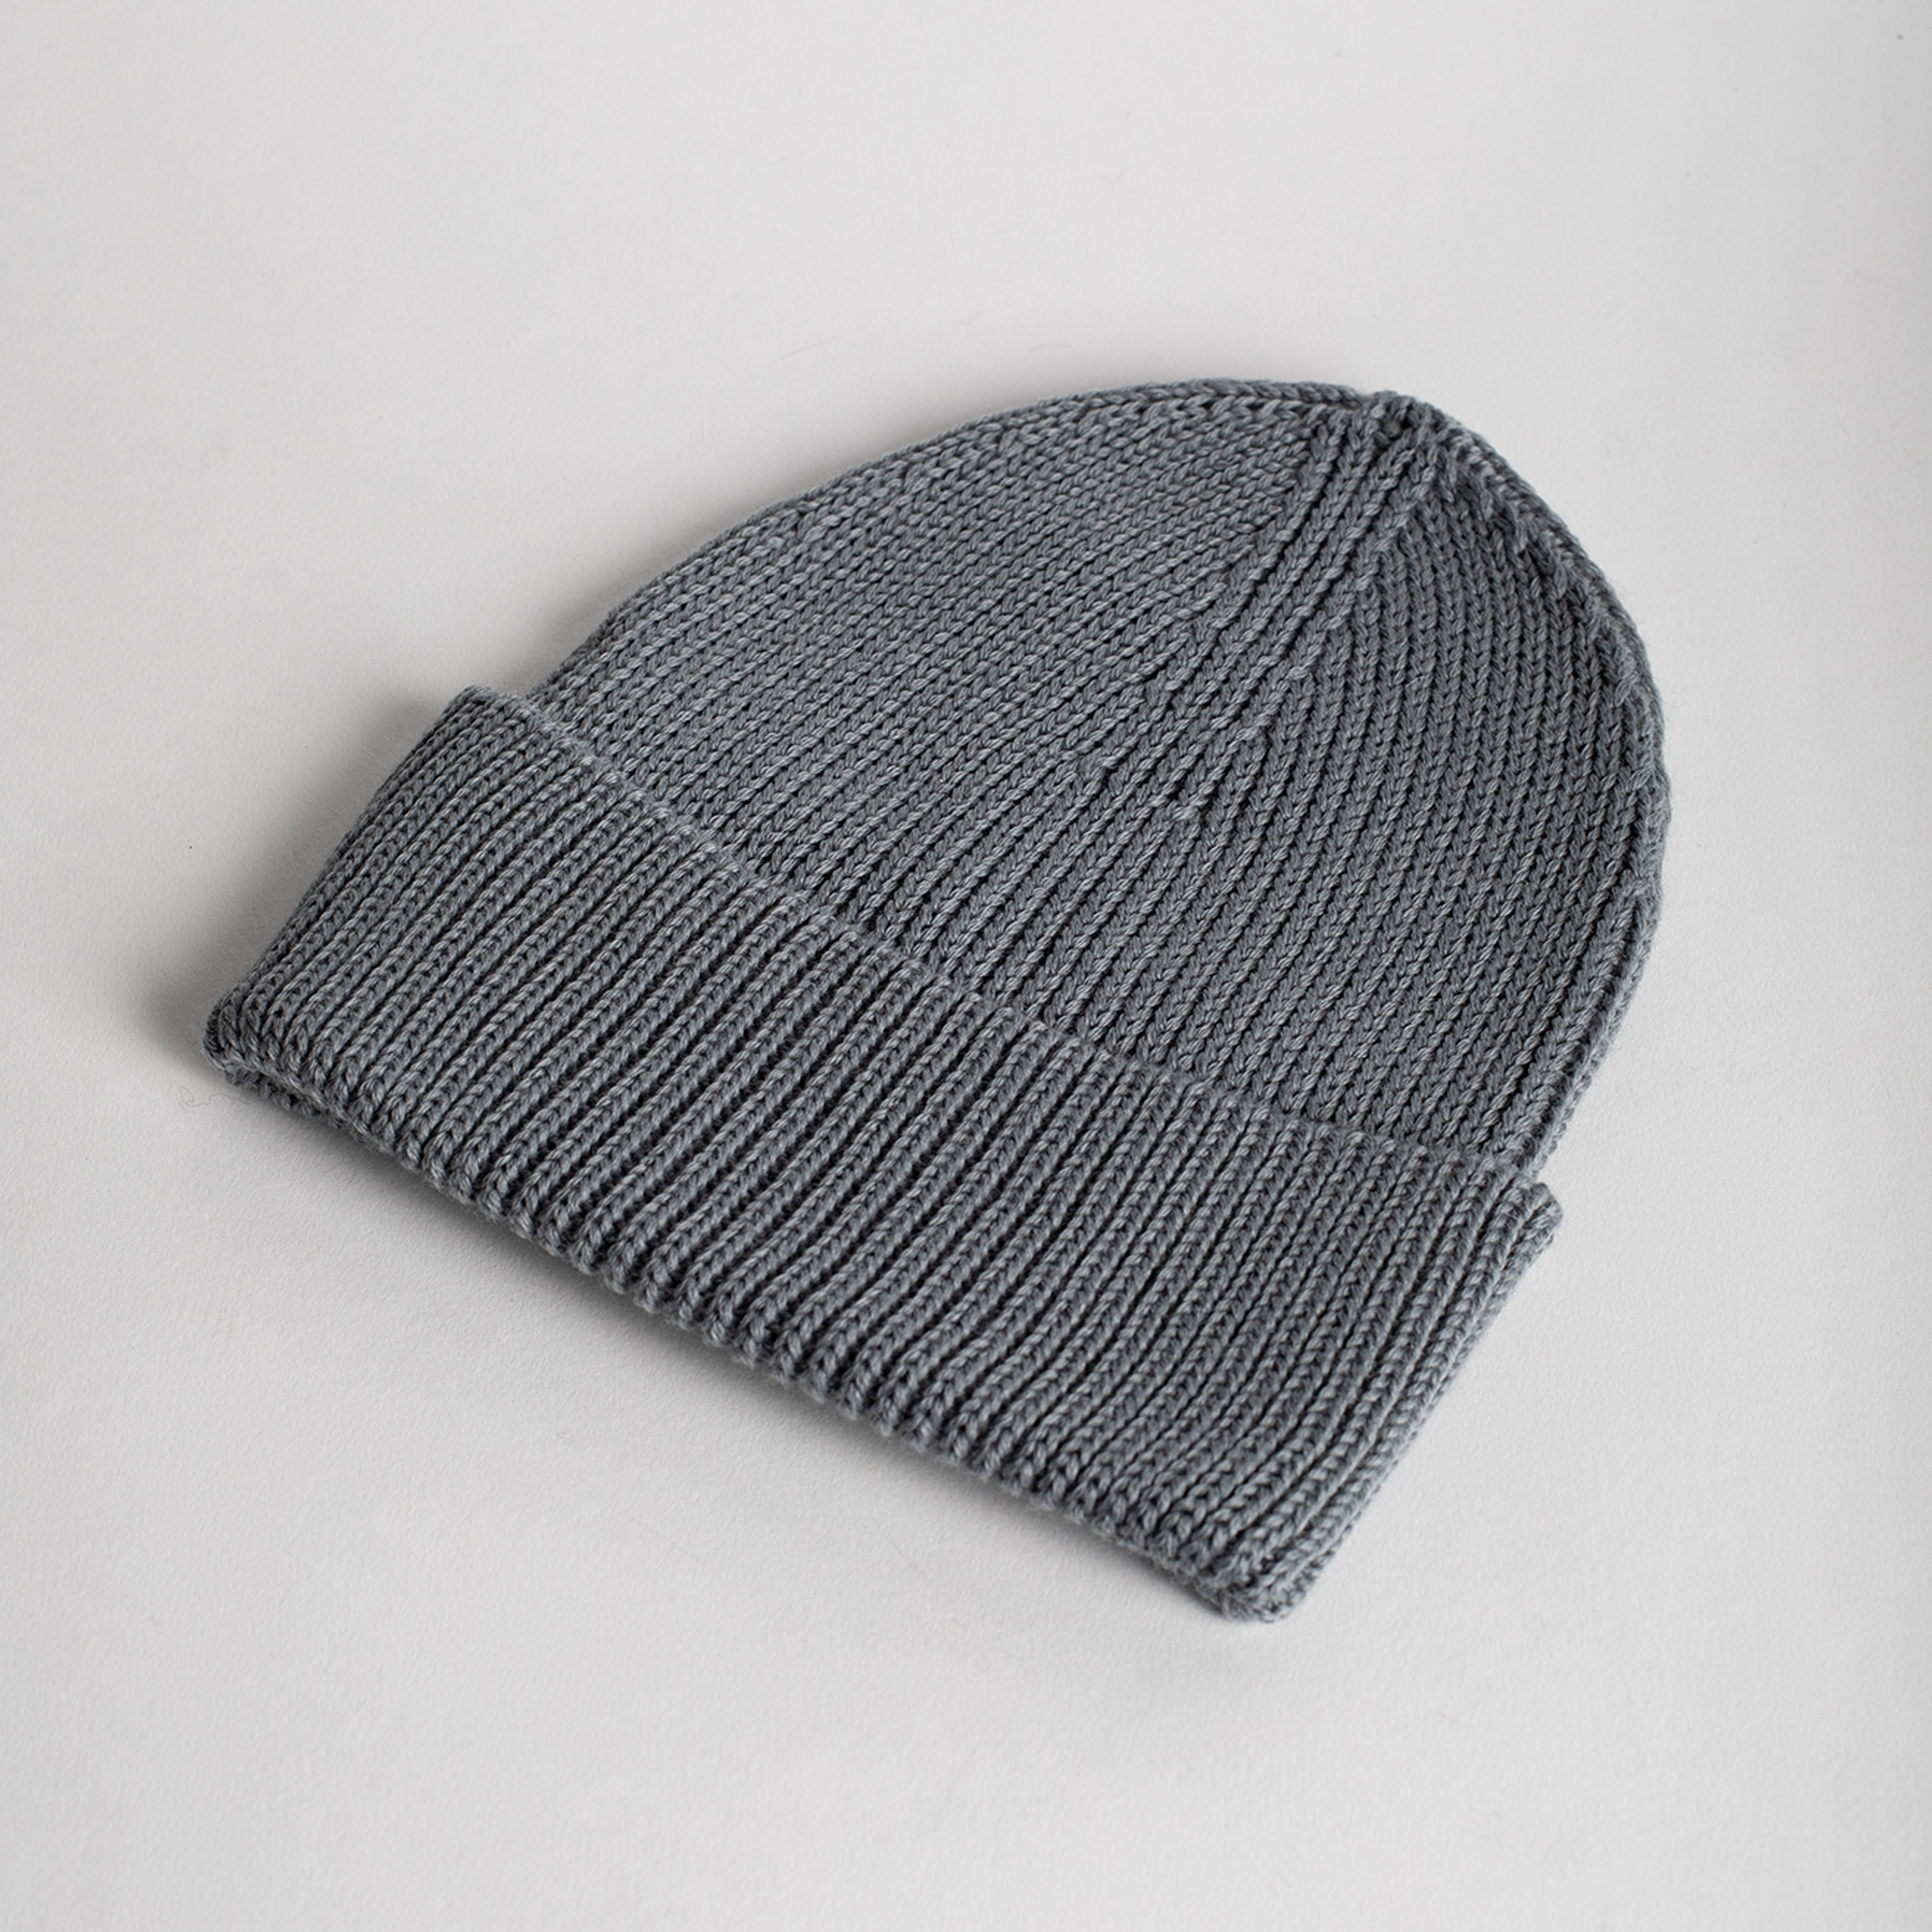 VICKO beanie in Concrete color by Arpenteur